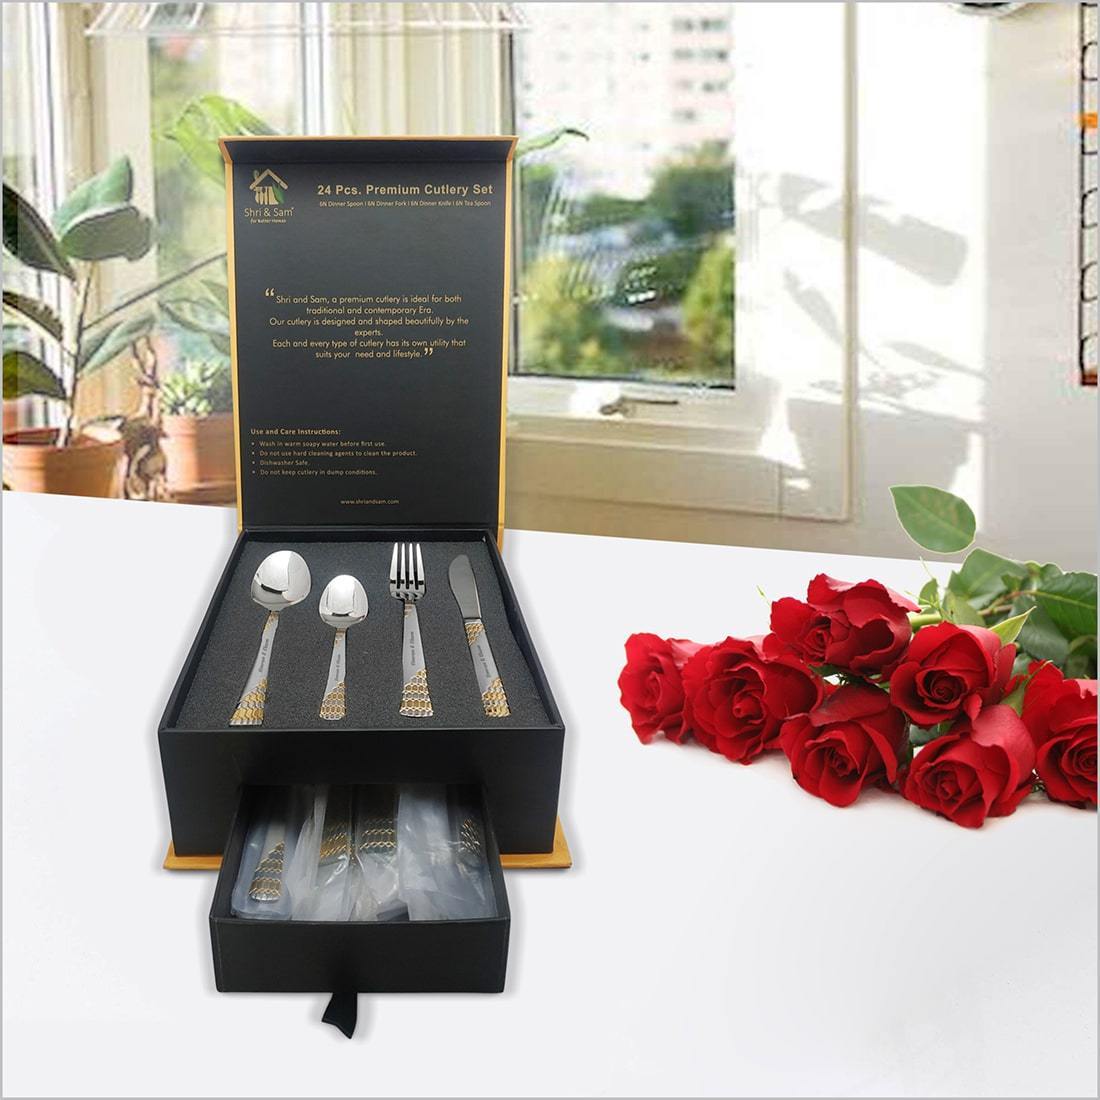 Top 5 Platinum Cutlery Sets For Fine Dining